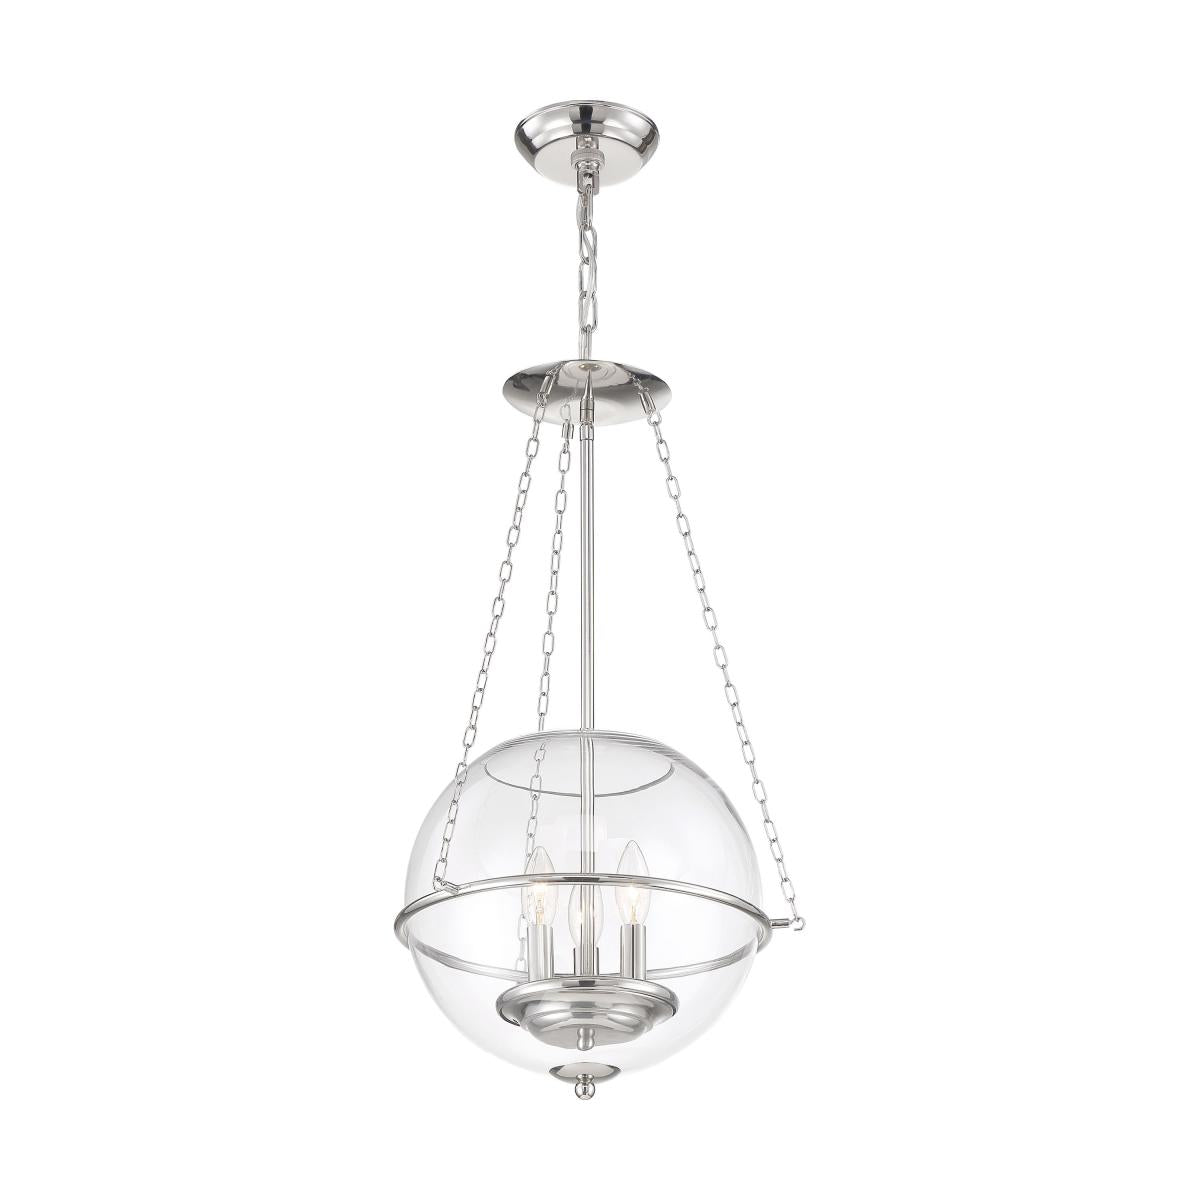 Odyssey - 3 Light Pendant - with Clear Glass - Polished Nickel Finish